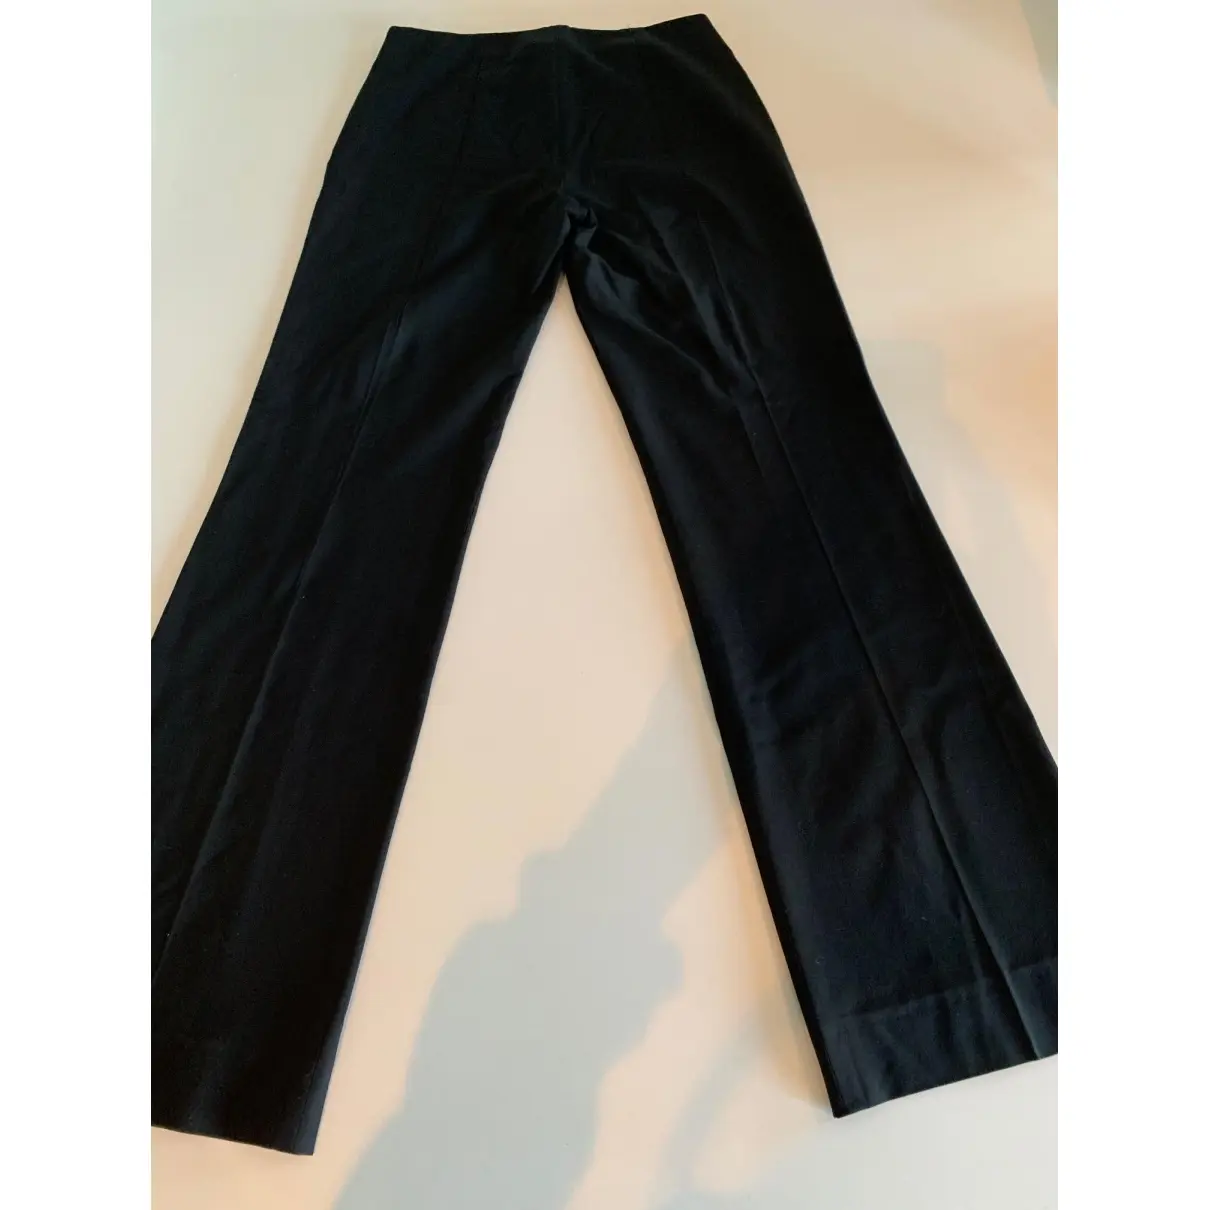 Dkny Wool trousers for sale - Vintage